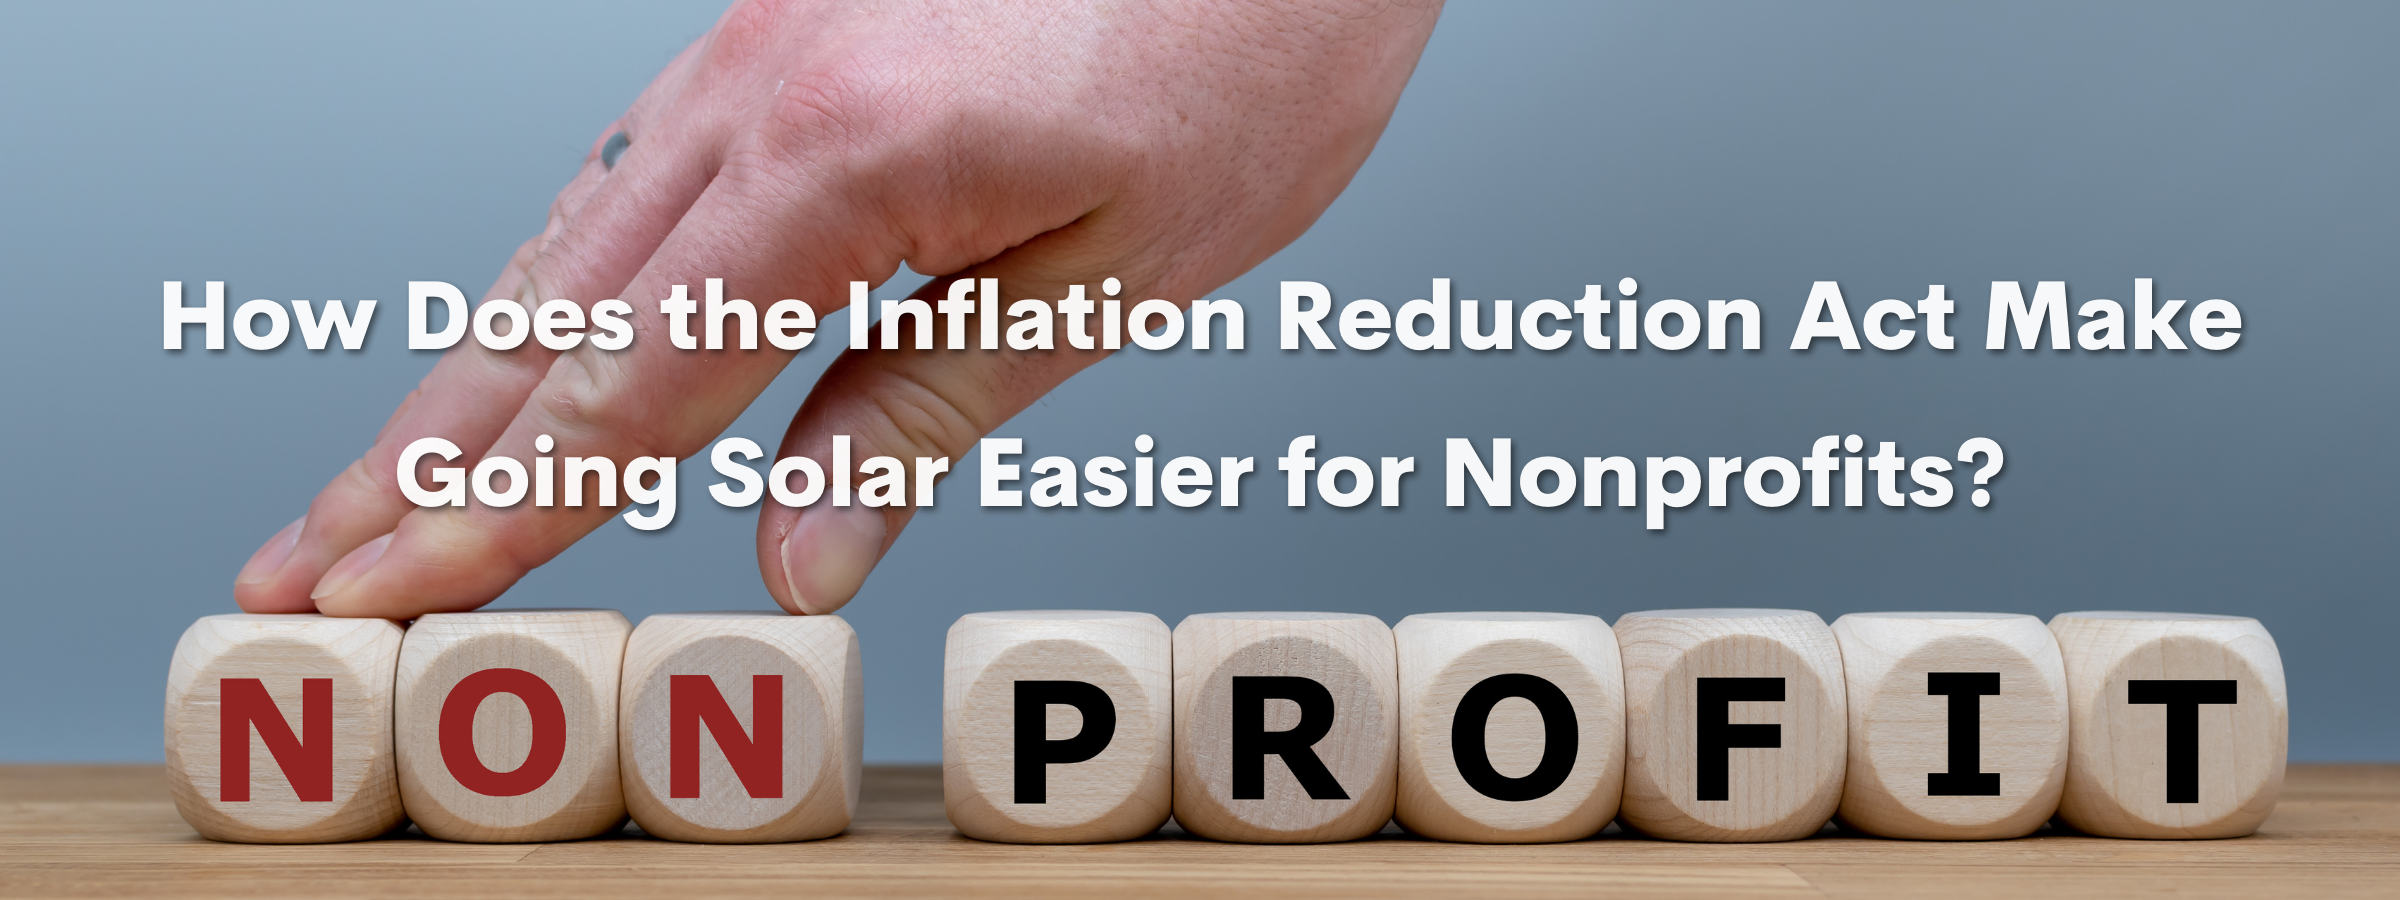 How Does the Inflation Reduction Act Make Going Solar Easier for Nonprofits?